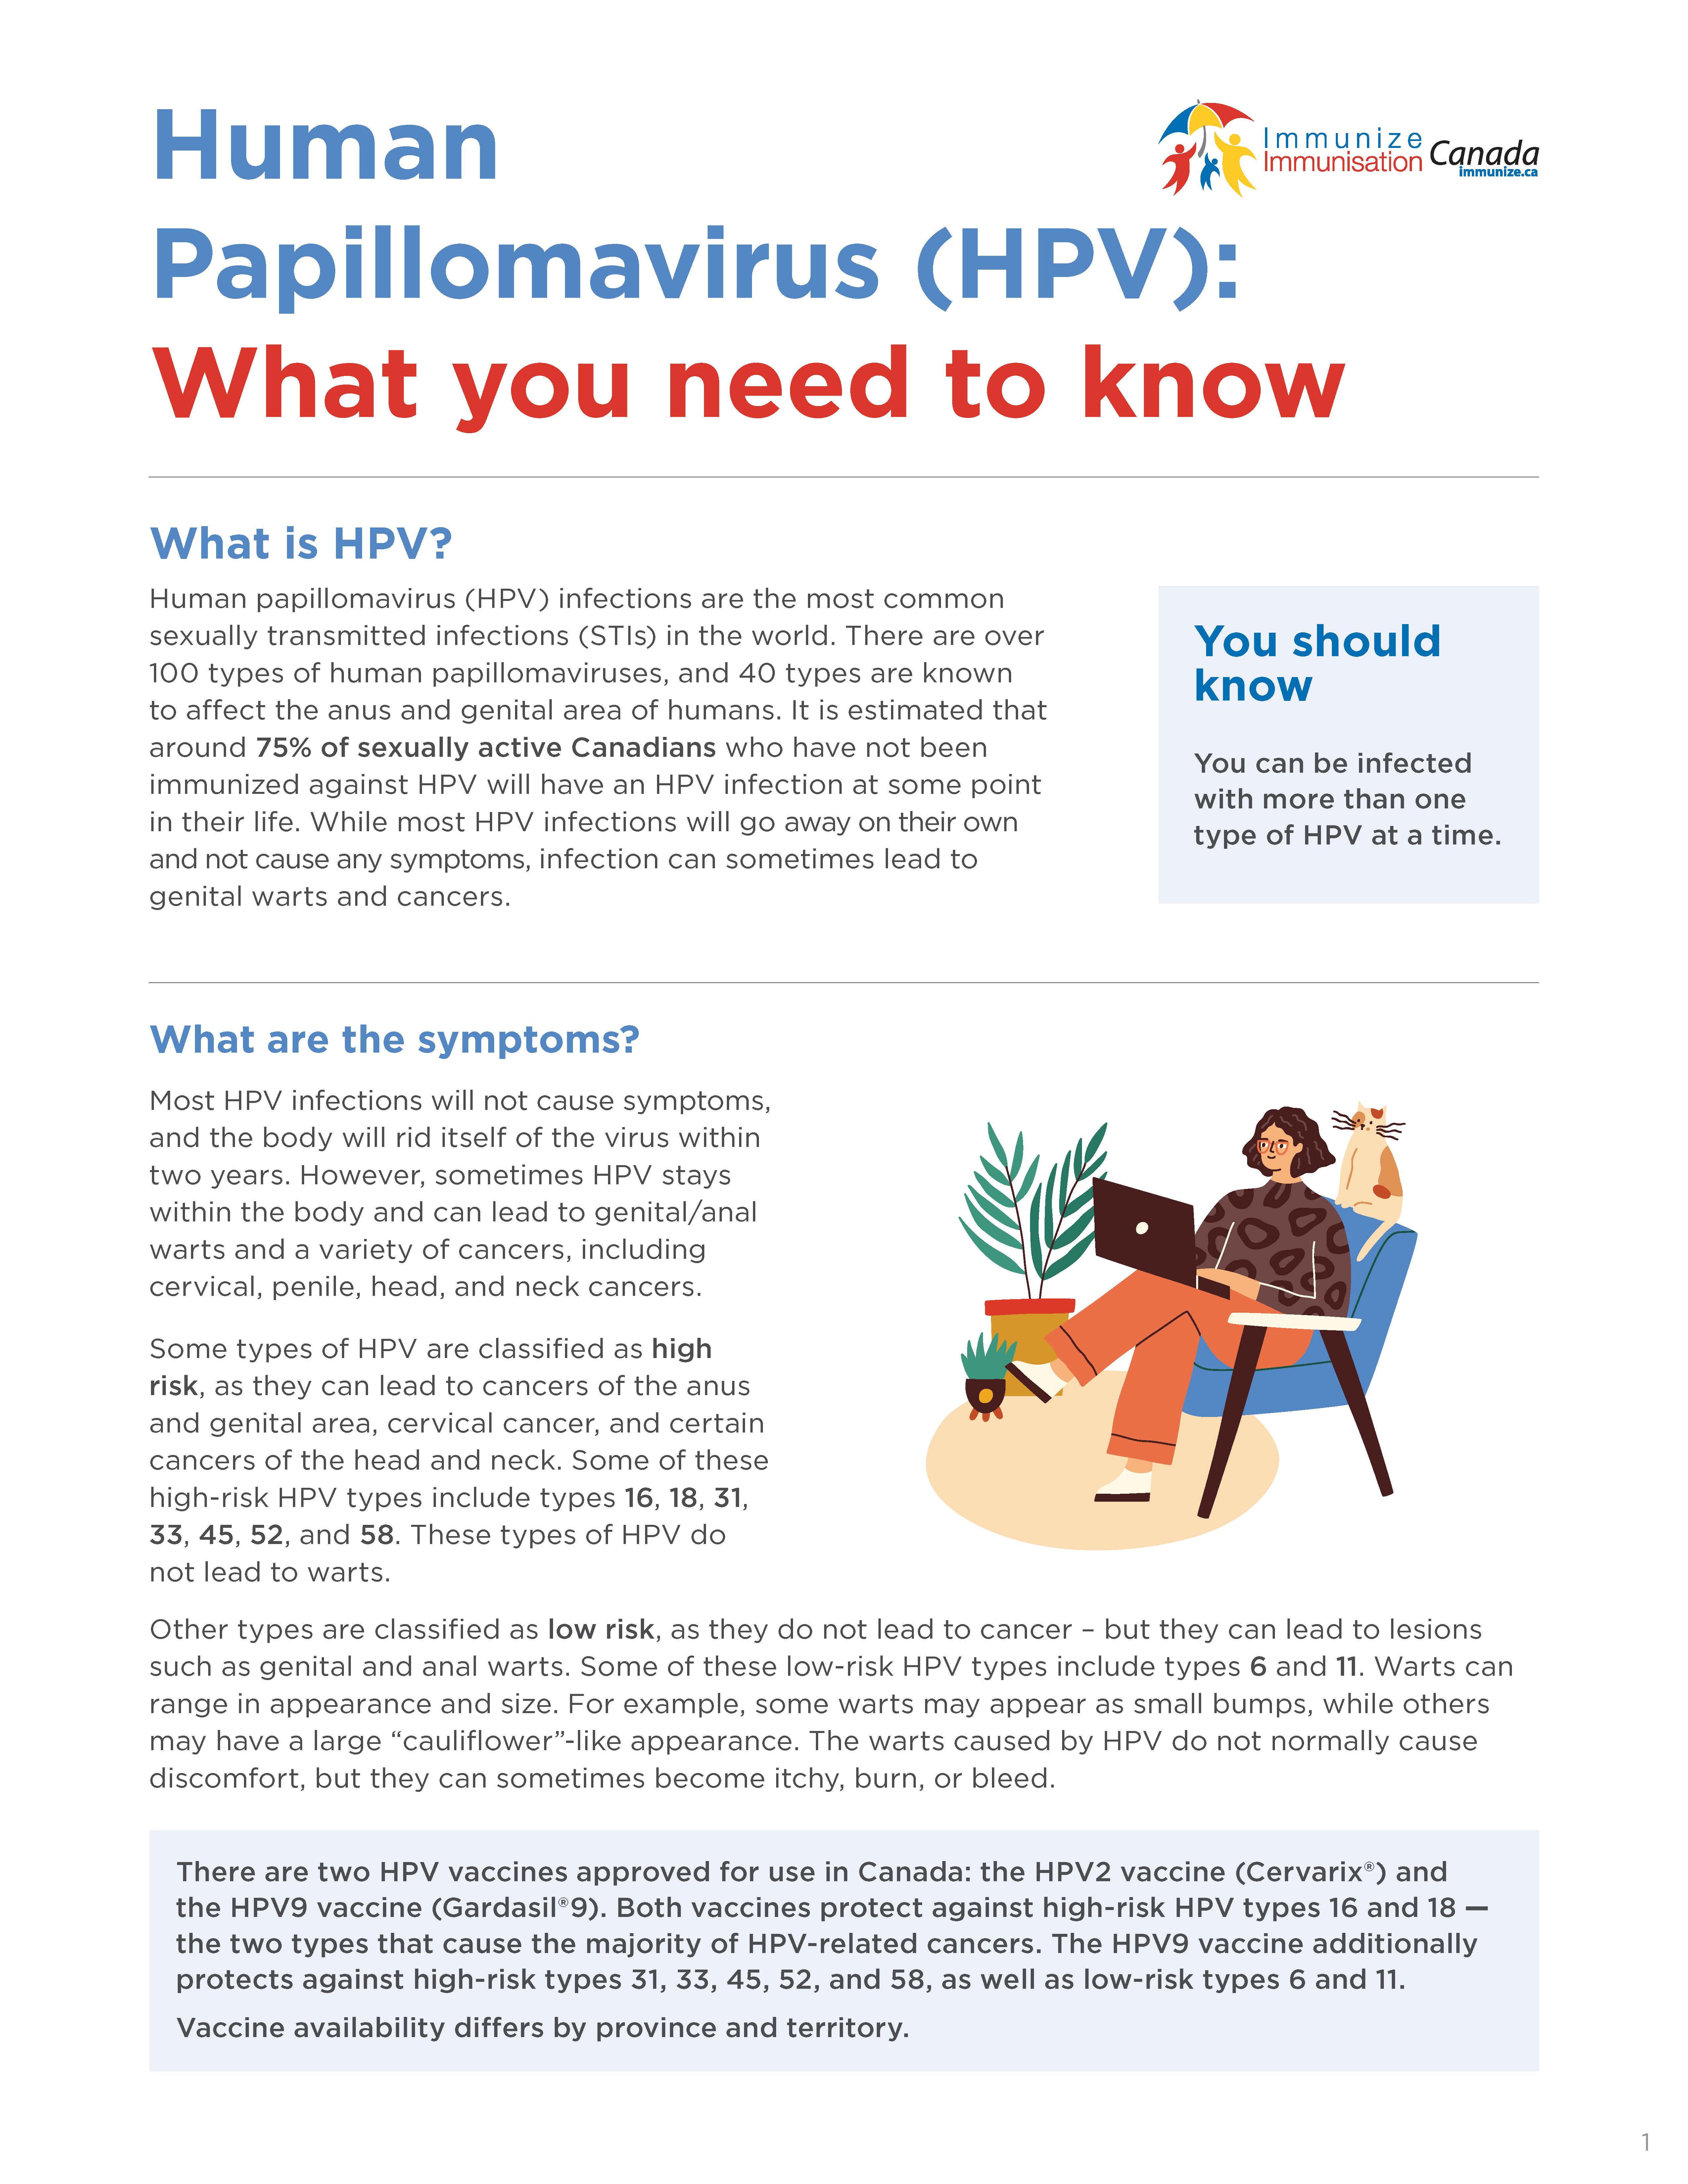 Human papillomavirus (HPV): What you need to know